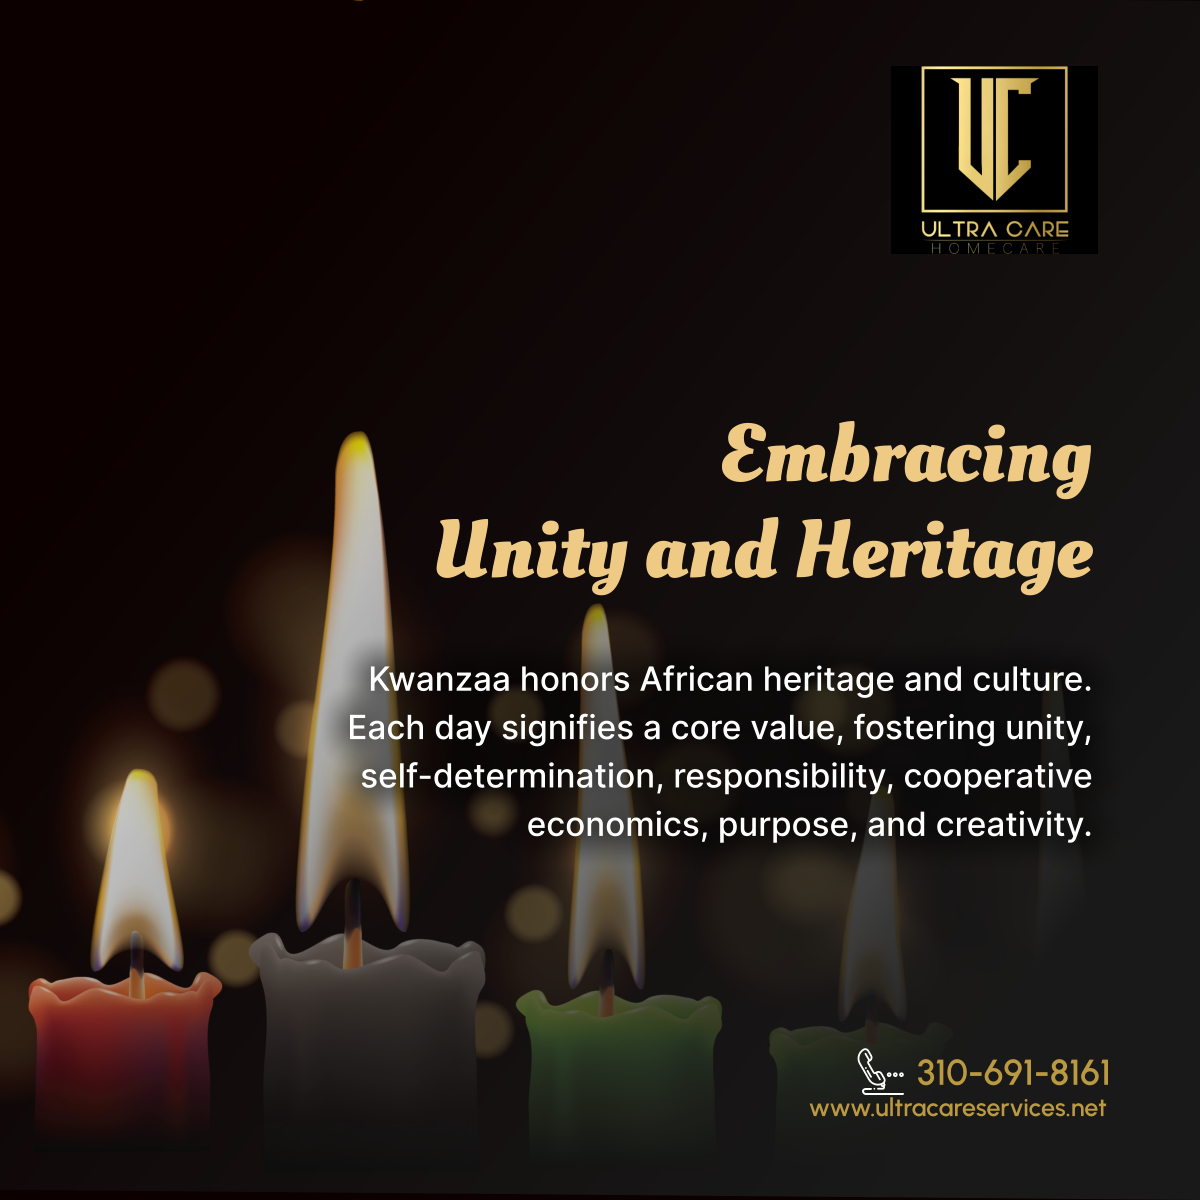 Join the joyous festivities, embrace cultural richness, and cultivate unity during this special holiday season. Wishing you a Happy Kwanzaa filled with warmth, love, and the spirit of togetherness!

#HappyKwanzaa #HomeCare #LosAngelesCA #EmbraceUnity #HolidaySeason